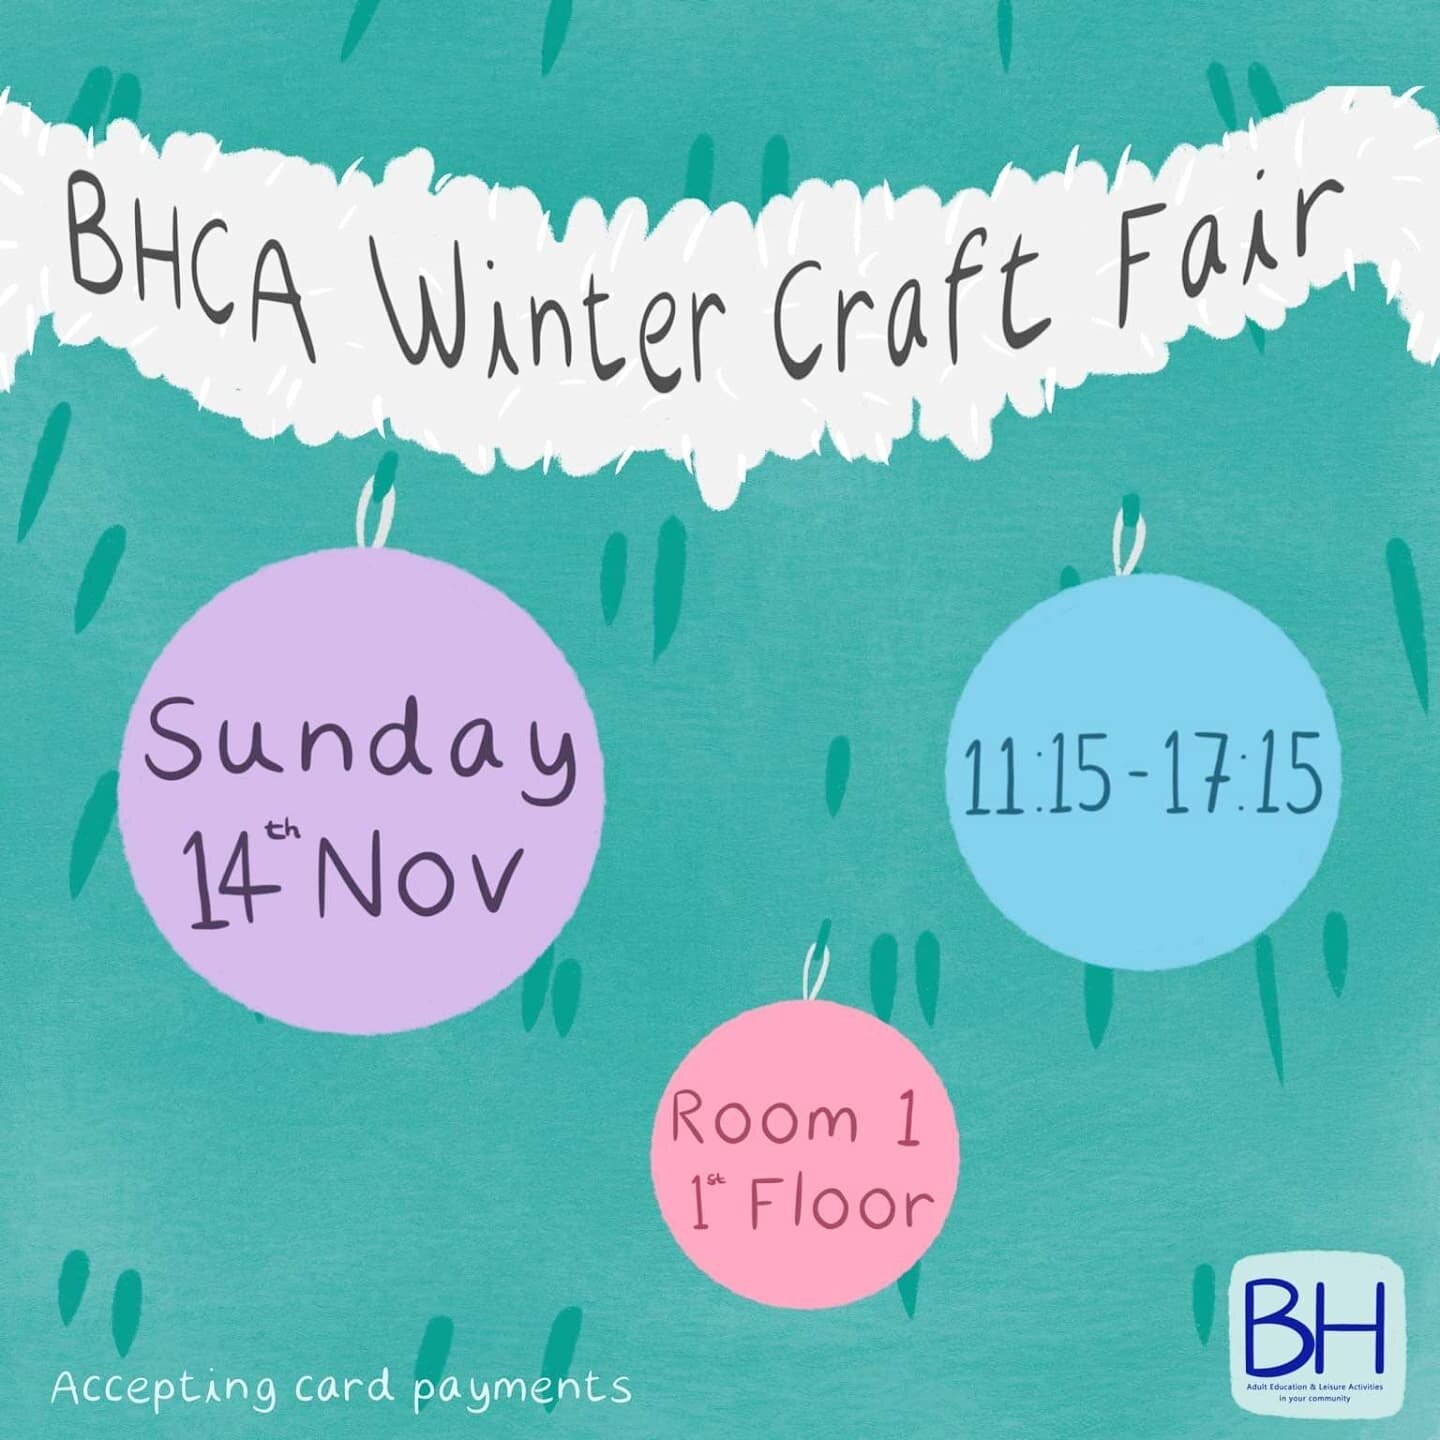 Find me this Sunday at the @bhca_community winter craft fair!

I will have my usual prints AND a new festive postcard for sale!

#illustration #wintercraftfair #craftfair #winterfair #BHCA #illustrationprints